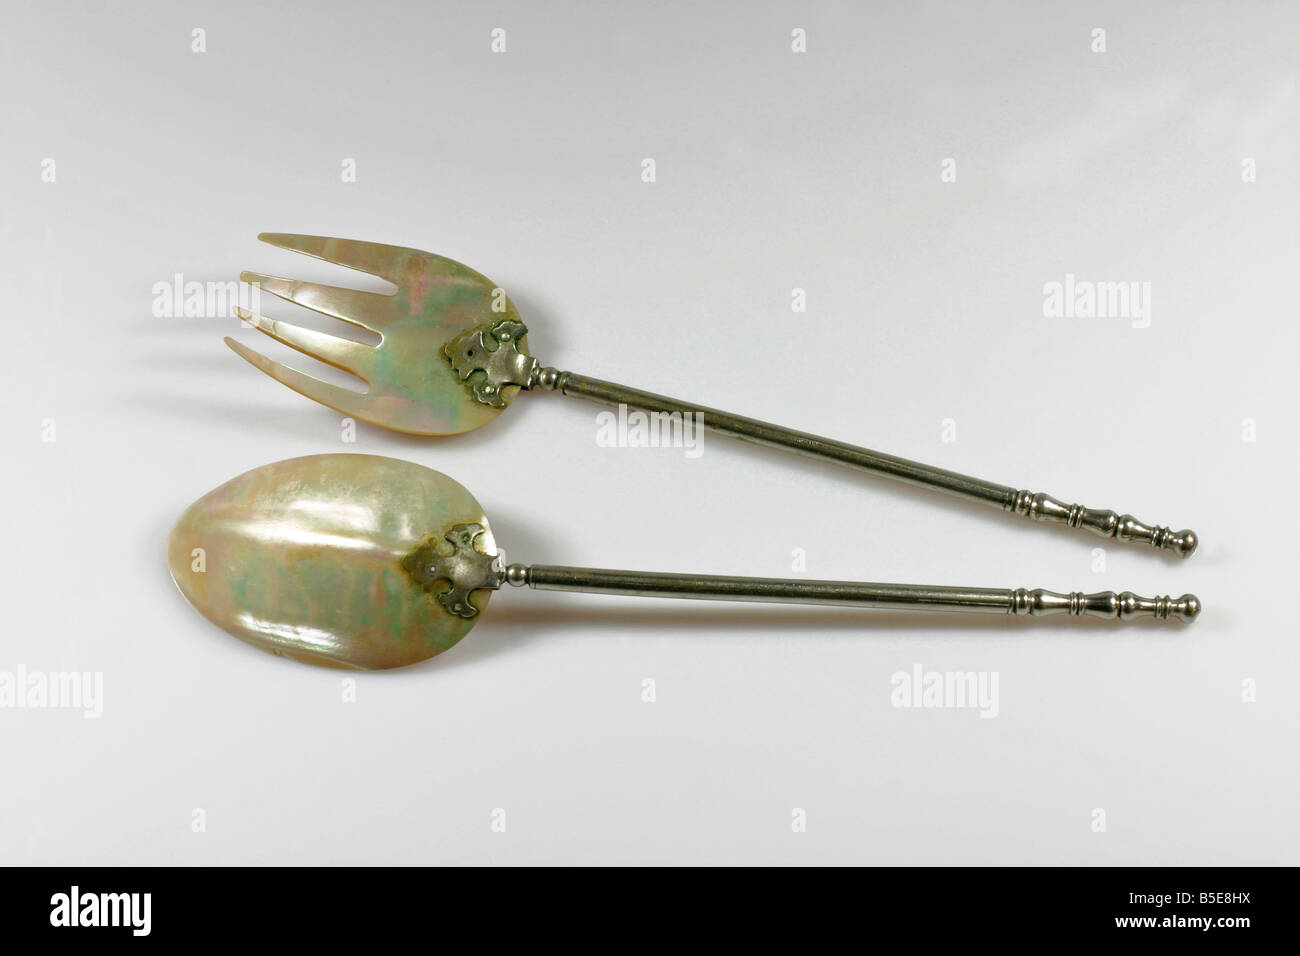 Antique Fork and Spoon salad servers made from Mother of Pearl and Silver Stock Photo